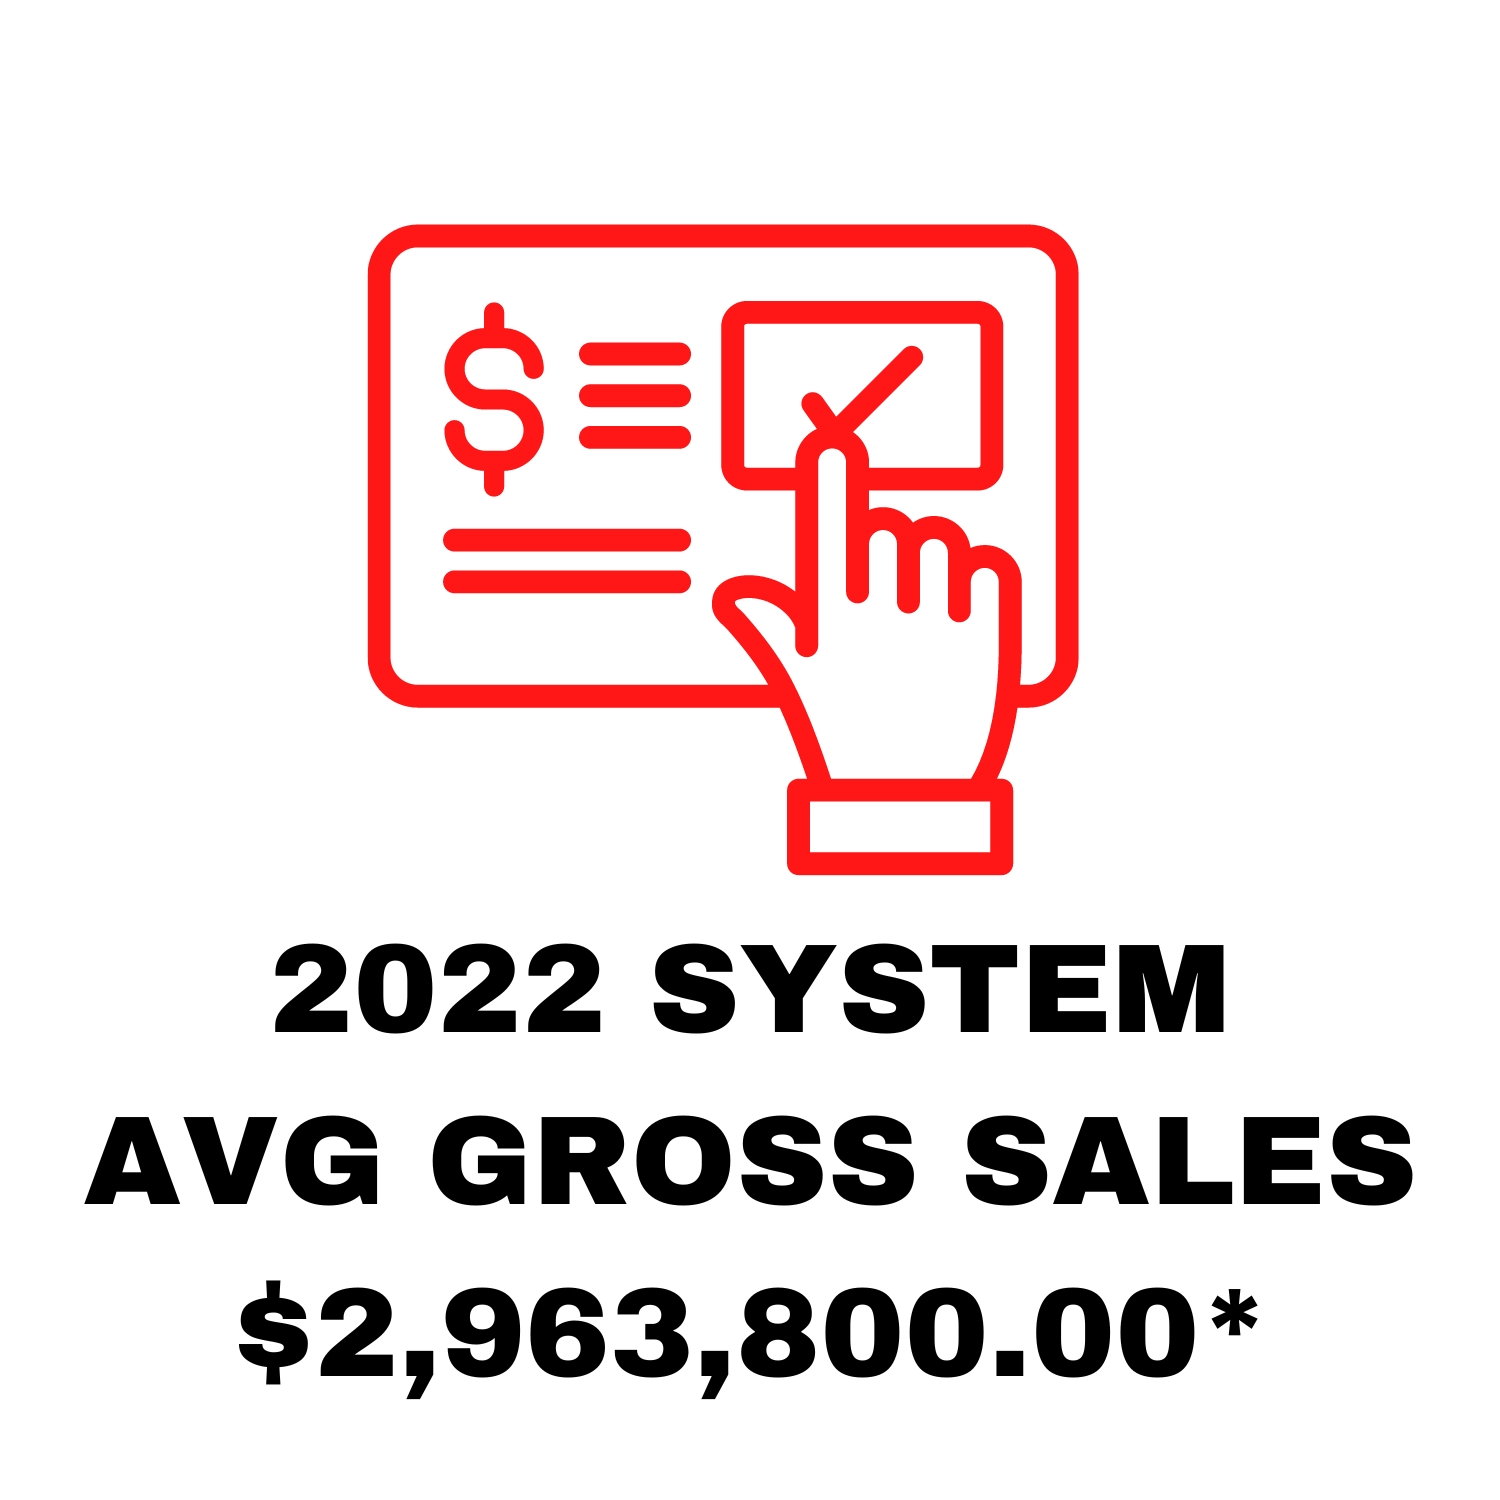 A graph showing the average gross sales for 2022 as 2.96 million.